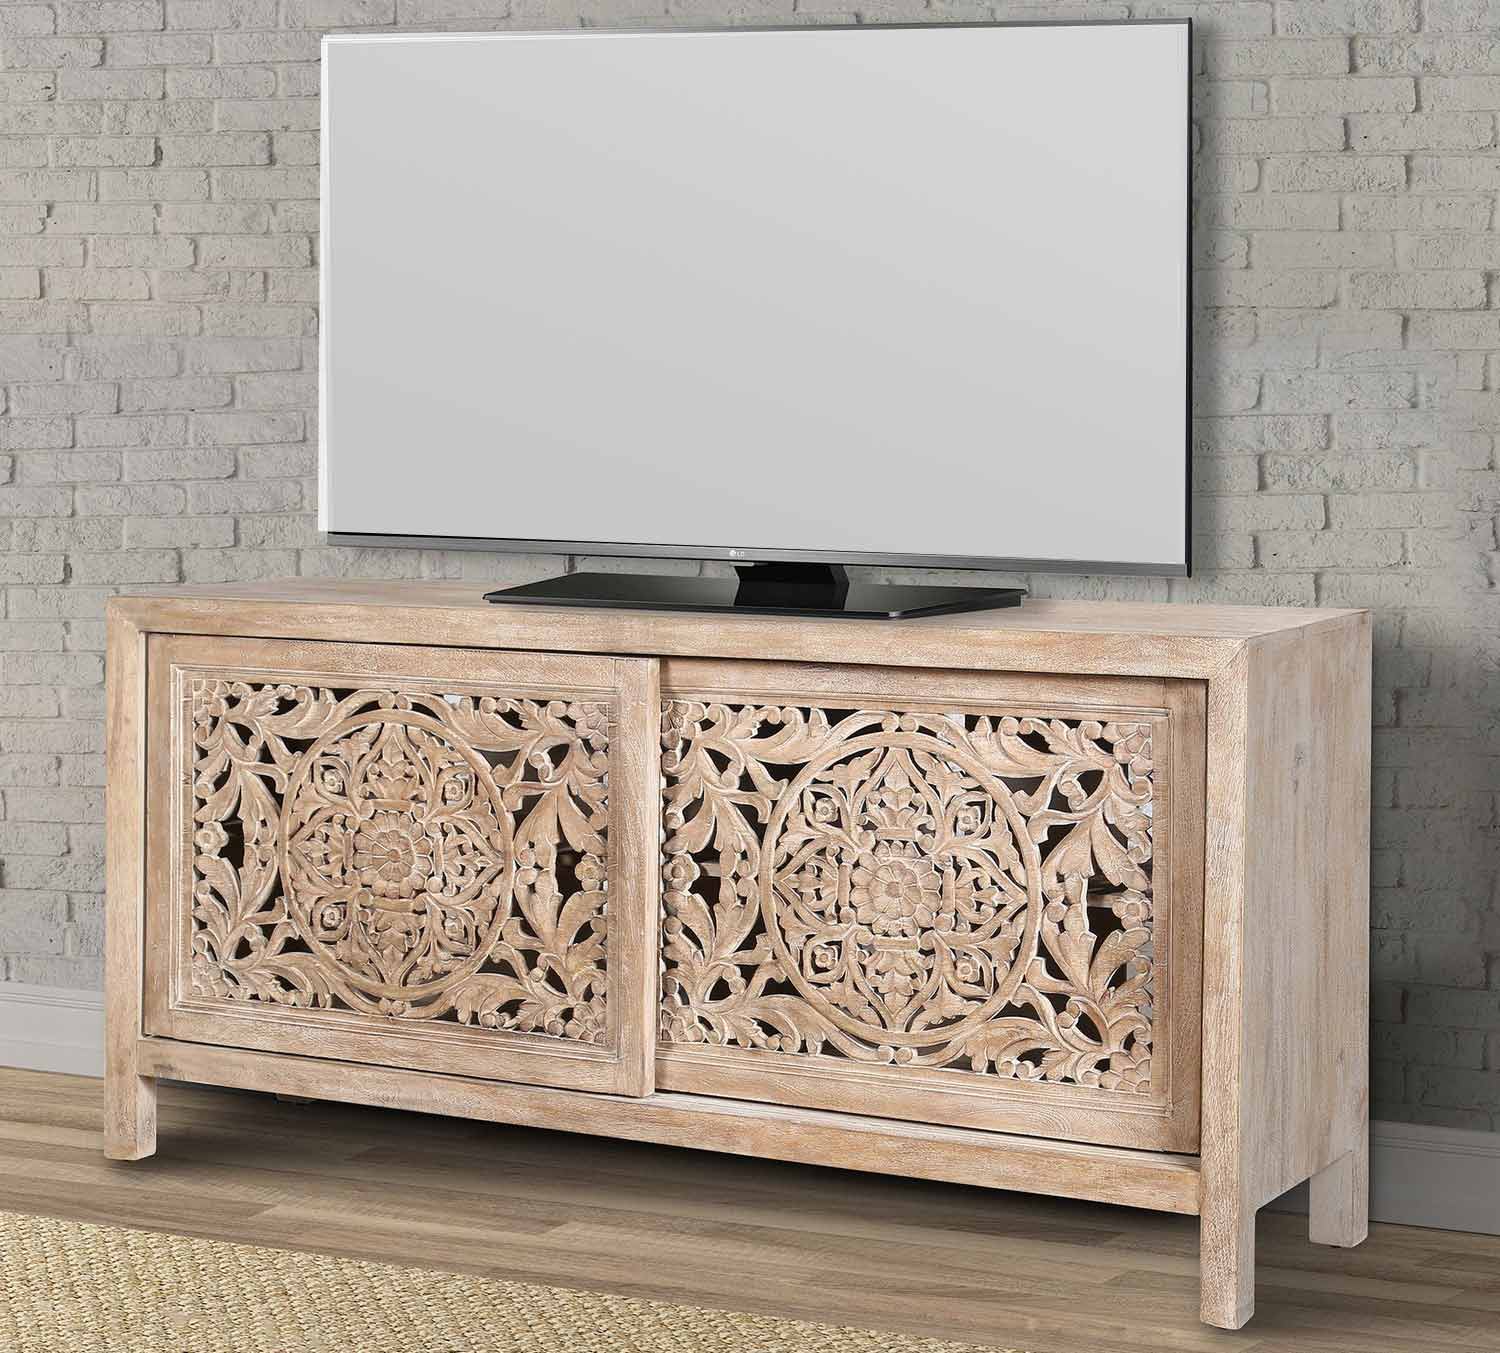 Parker House Crossings Eden 68 Inch TV Console - Toasted Tumbleweed